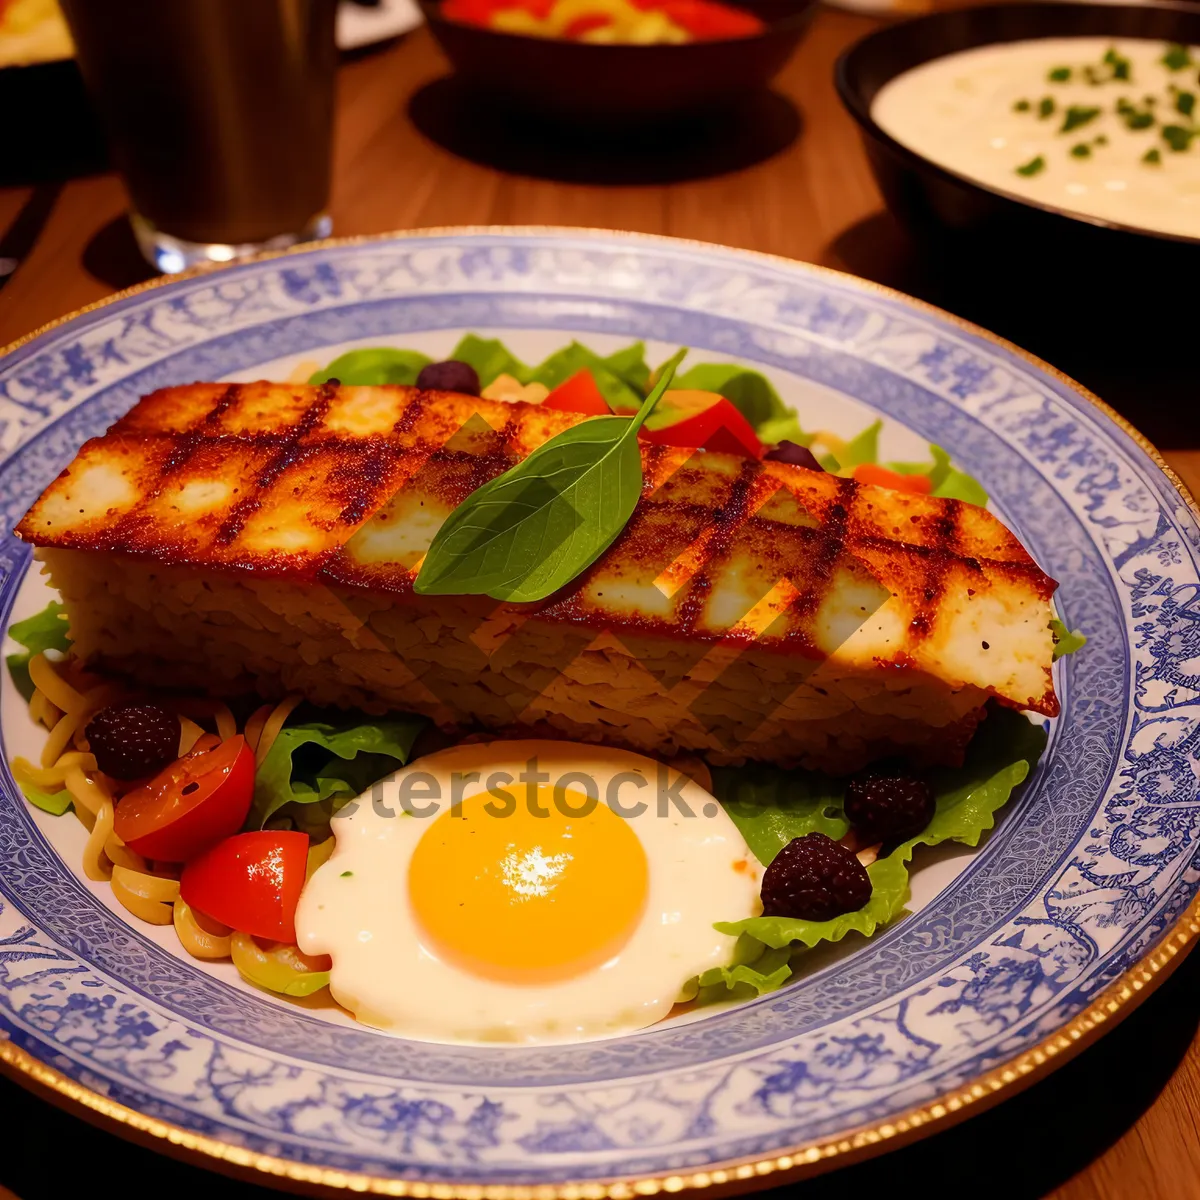 Picture of Nutrient-rich Vegetable Salad with Grilled Meat